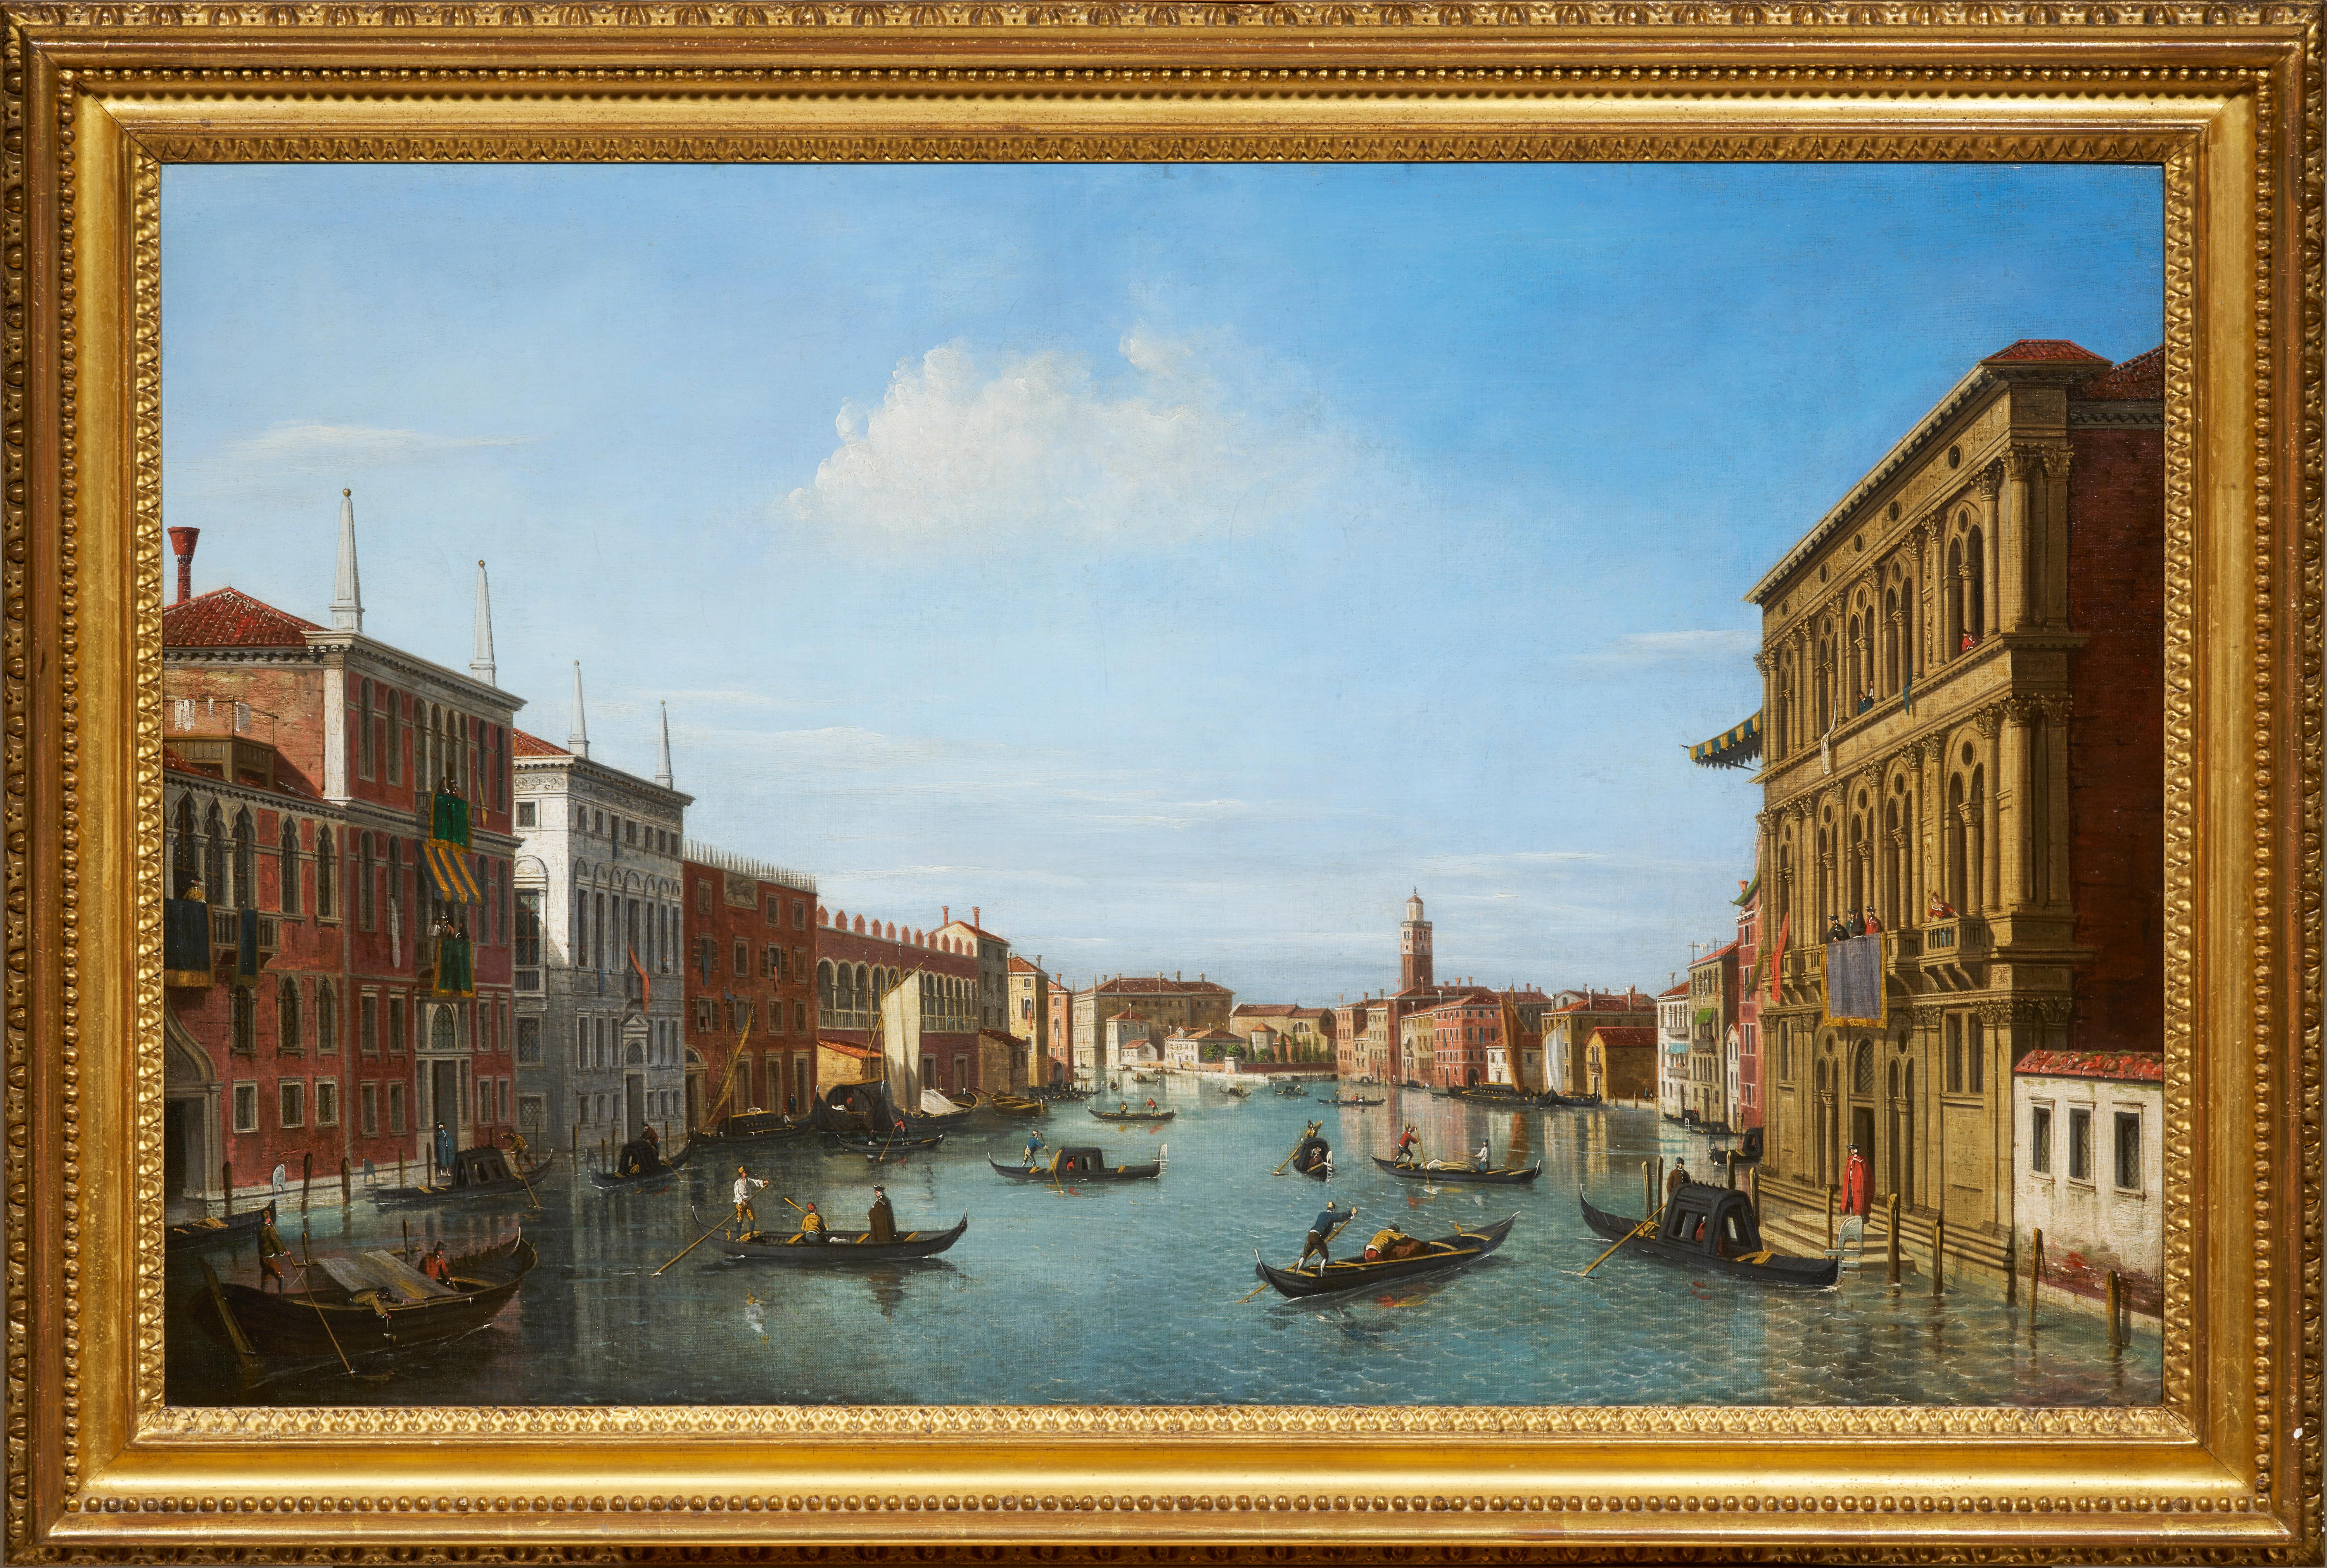 Although we have little bibliographical information on William James, we know that he was trained by Canaletto during the painter's stay in England between 1746 and 1755. Although he may never have been to Venice, William James remained under the